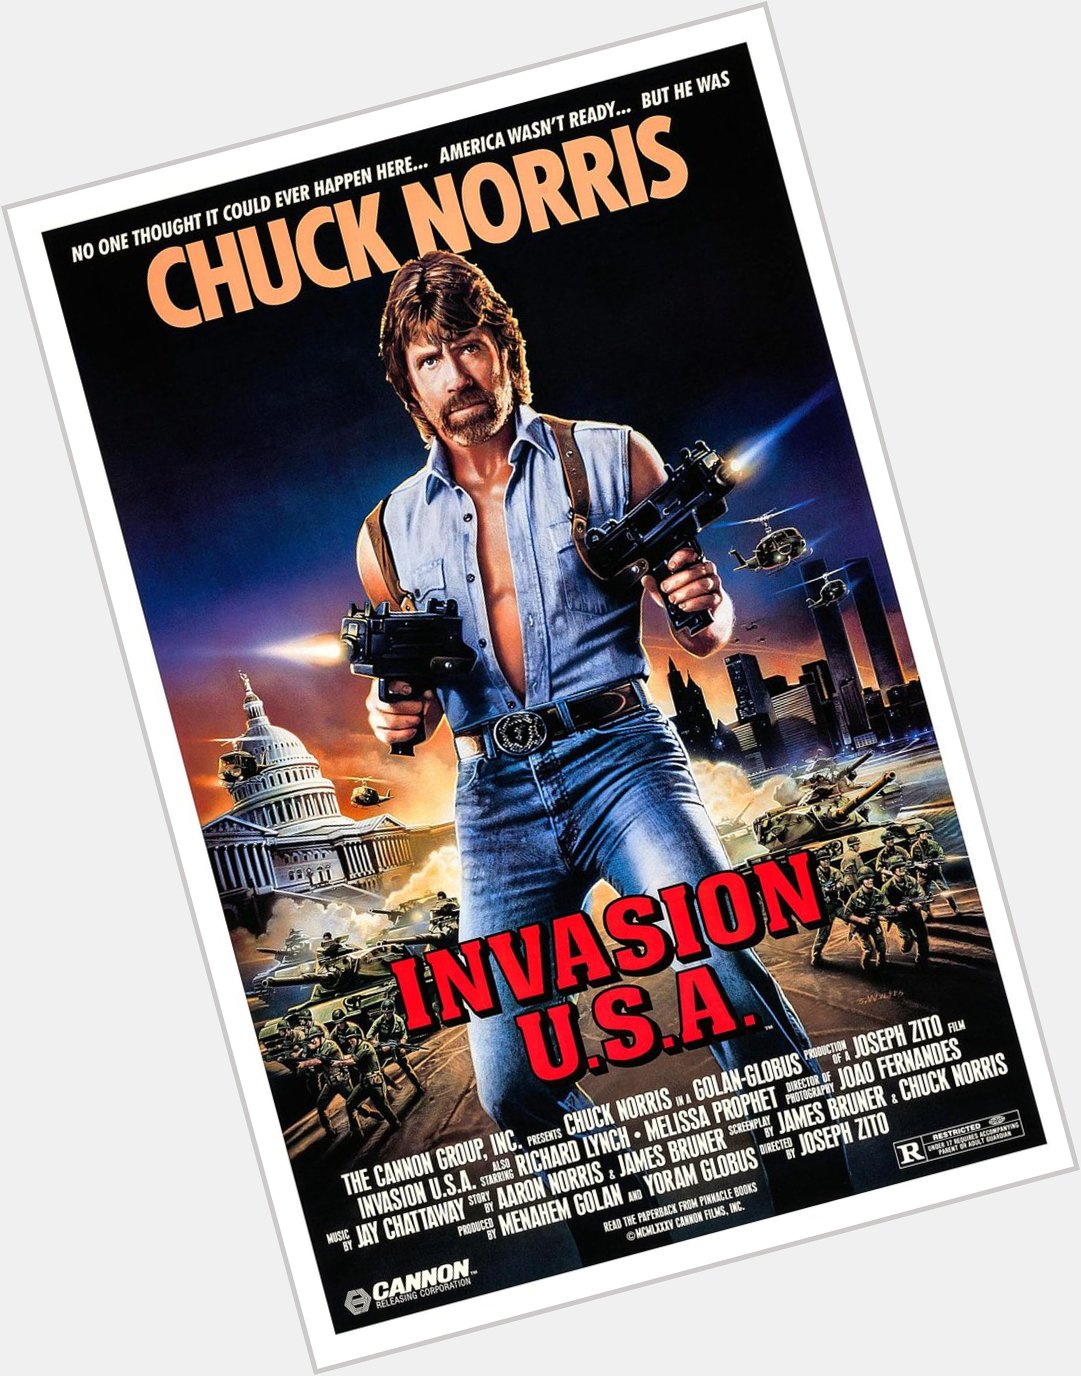 Happy 79th birthday to the inimitable Chuck Norris! 